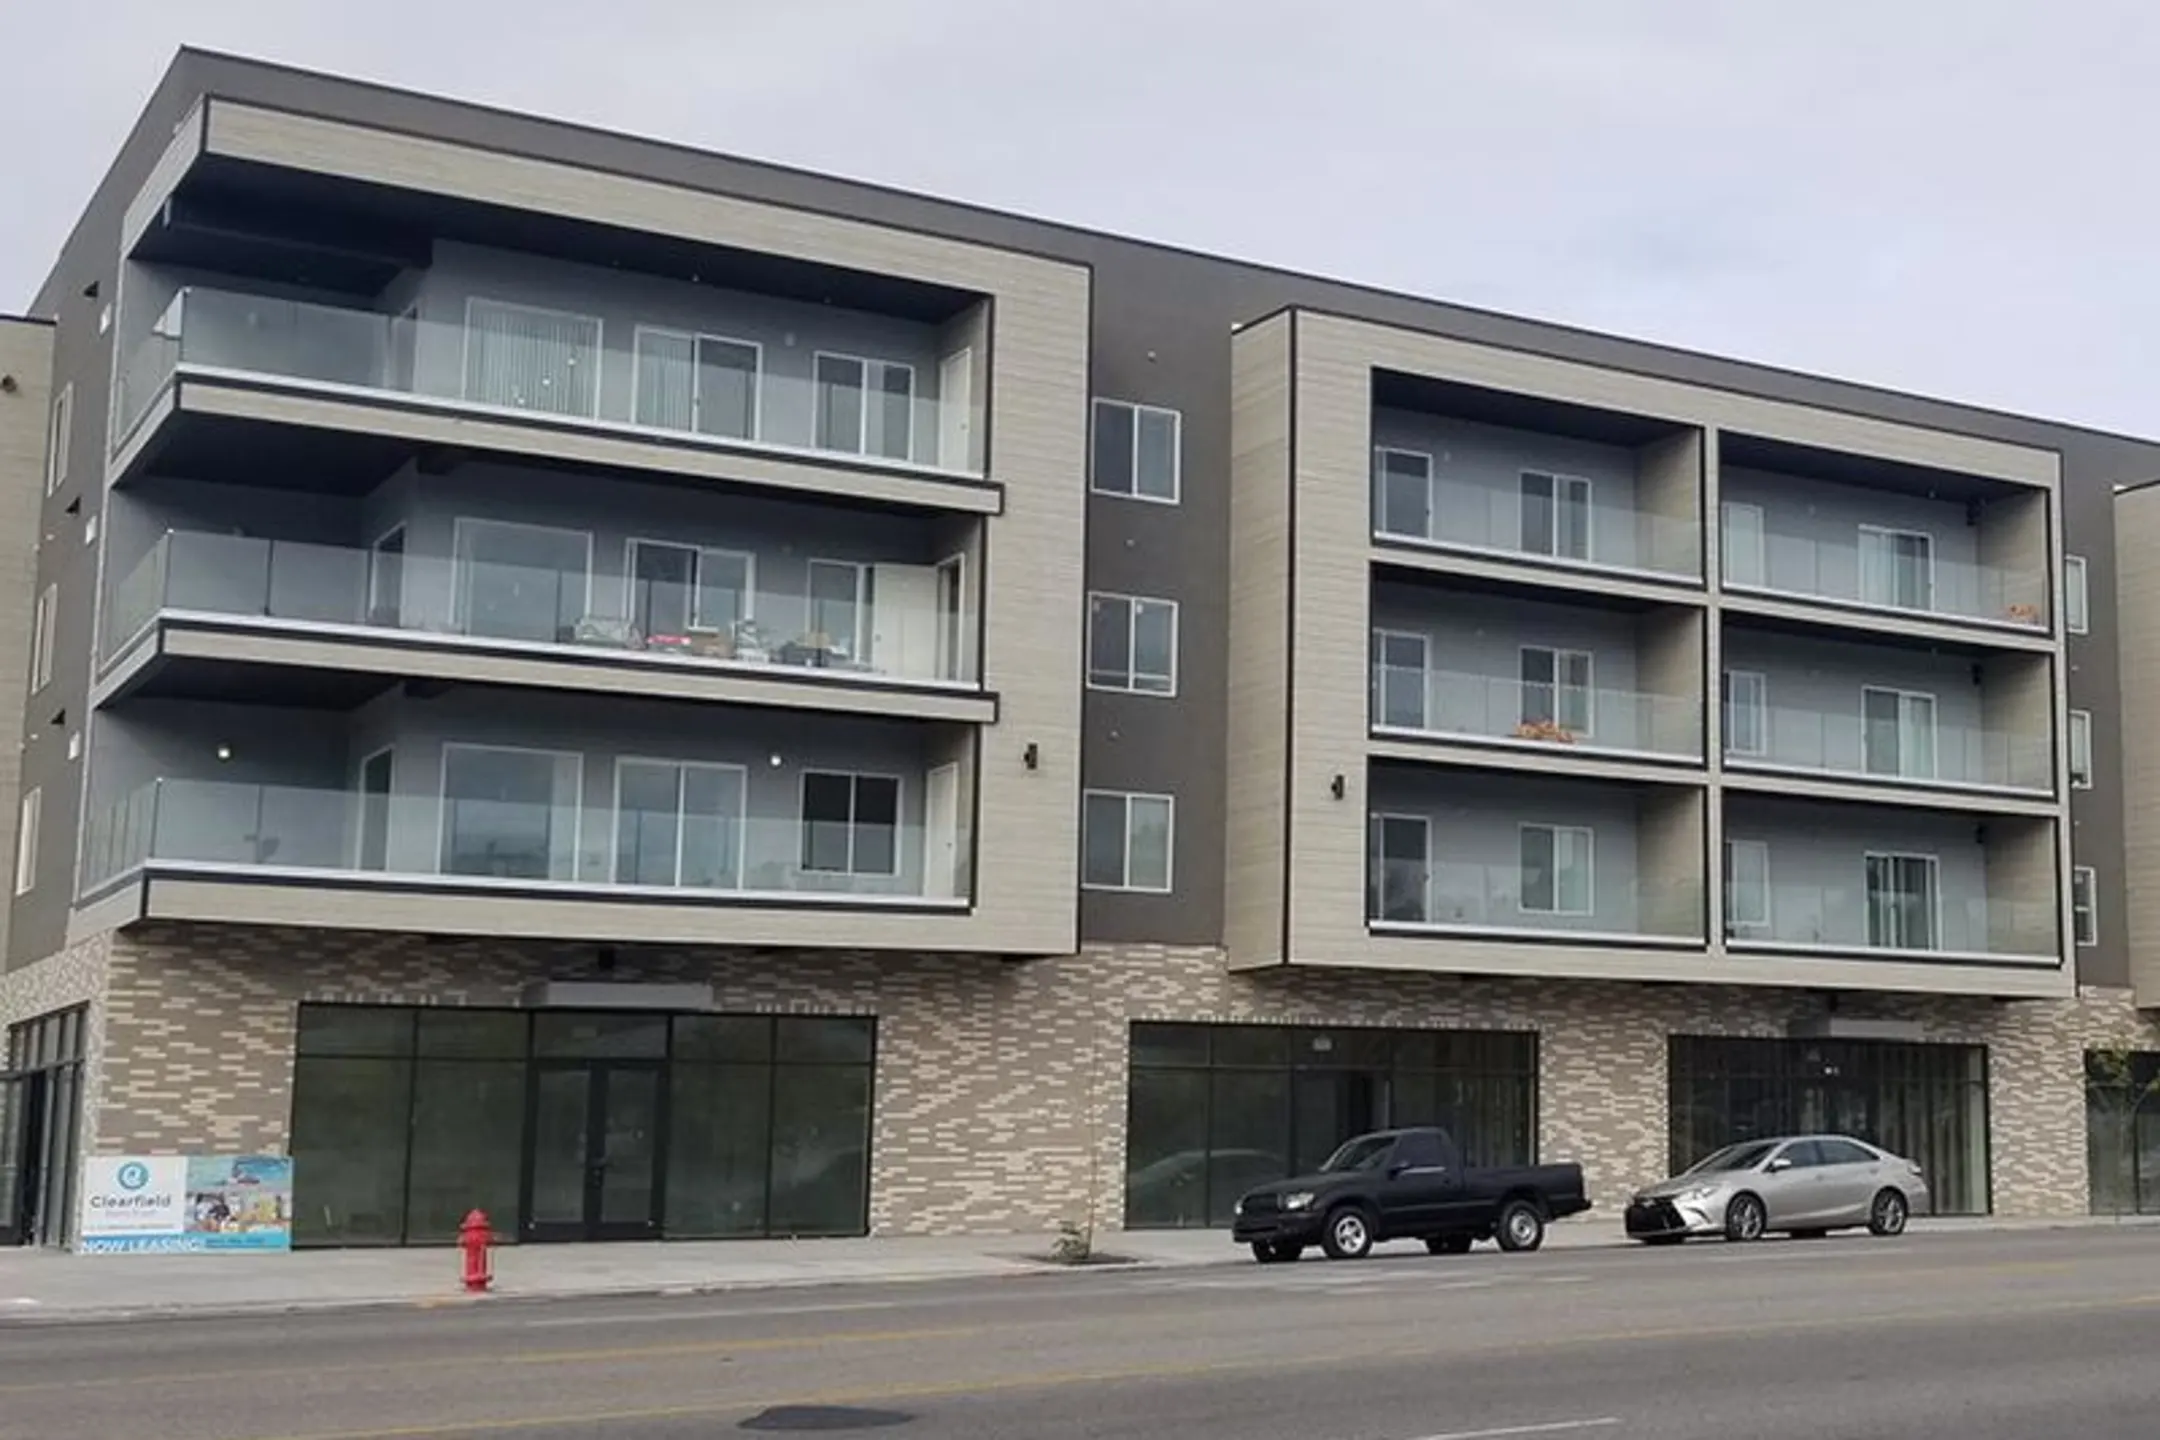 Building - Clearfield Junction Apartments - Clearfield, UT